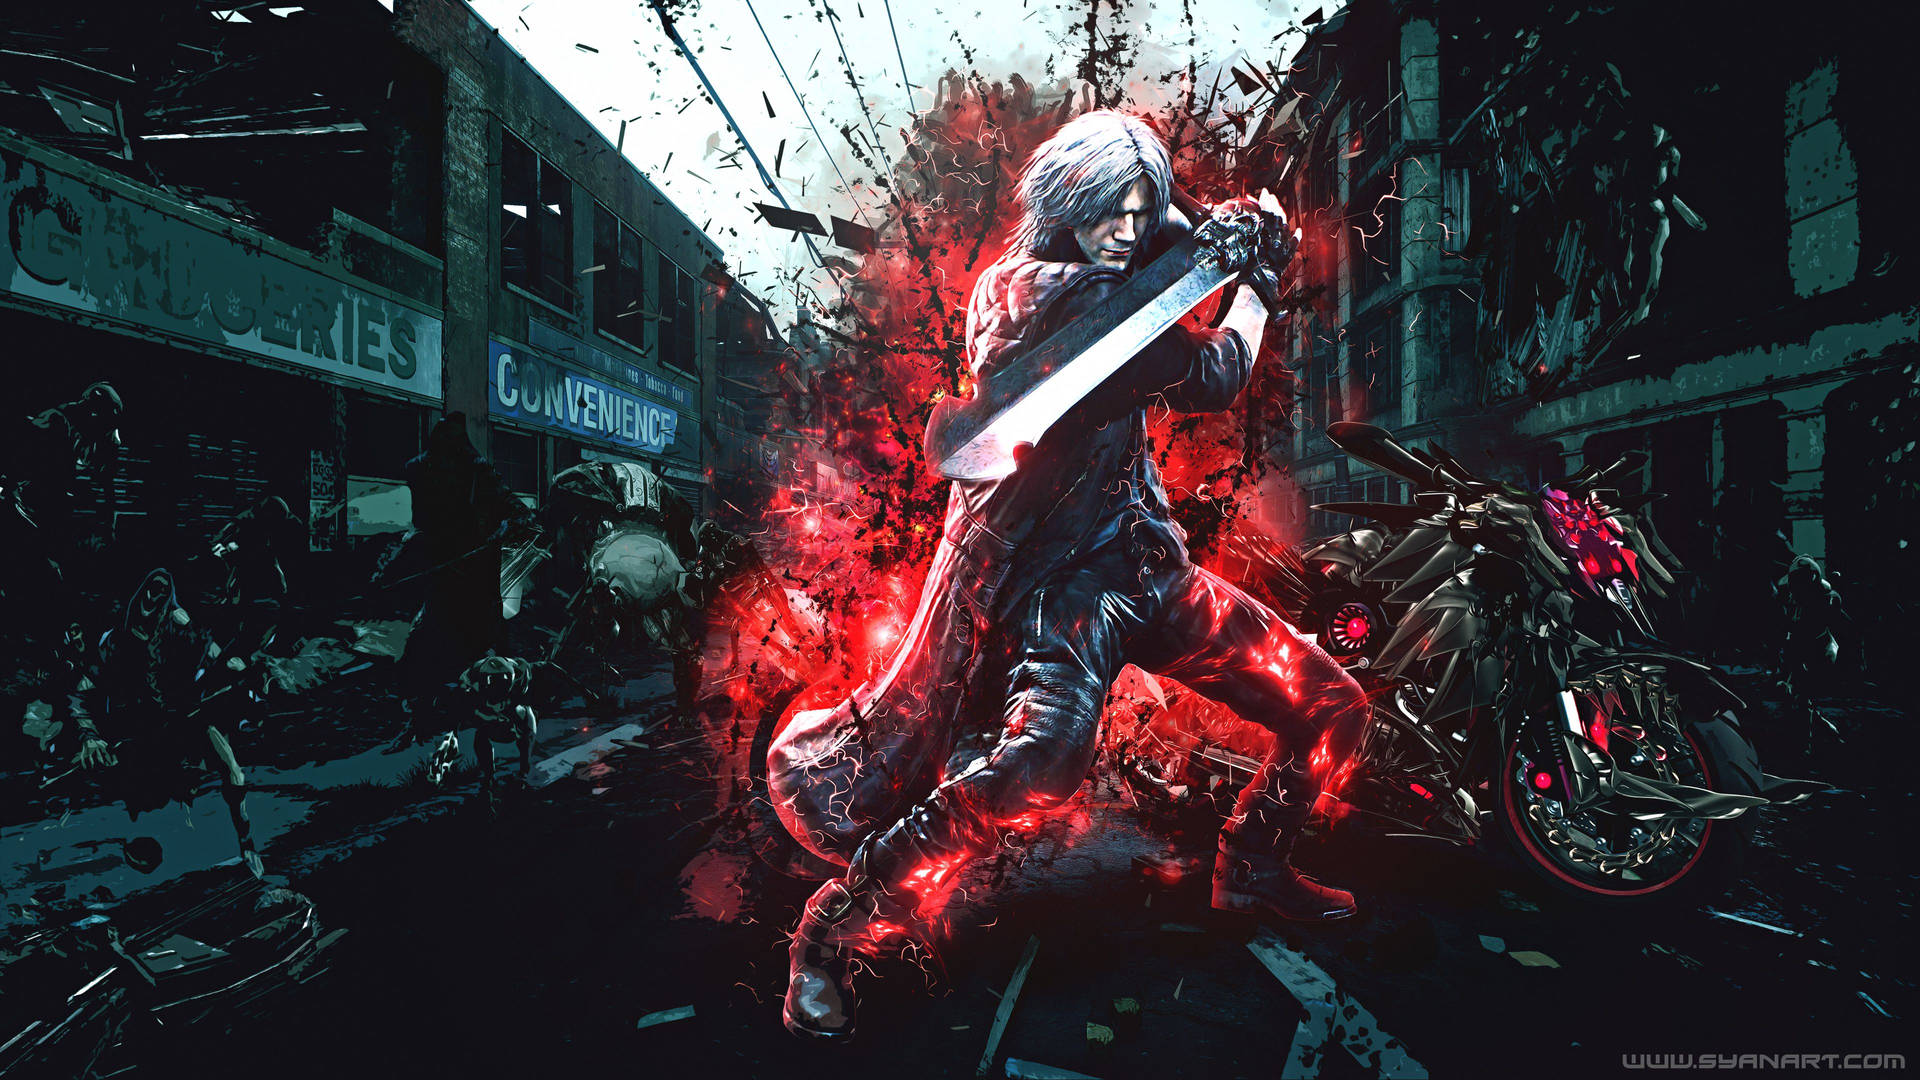 Come for a ride with Dante in Devil May Cry 5 Wallpaper